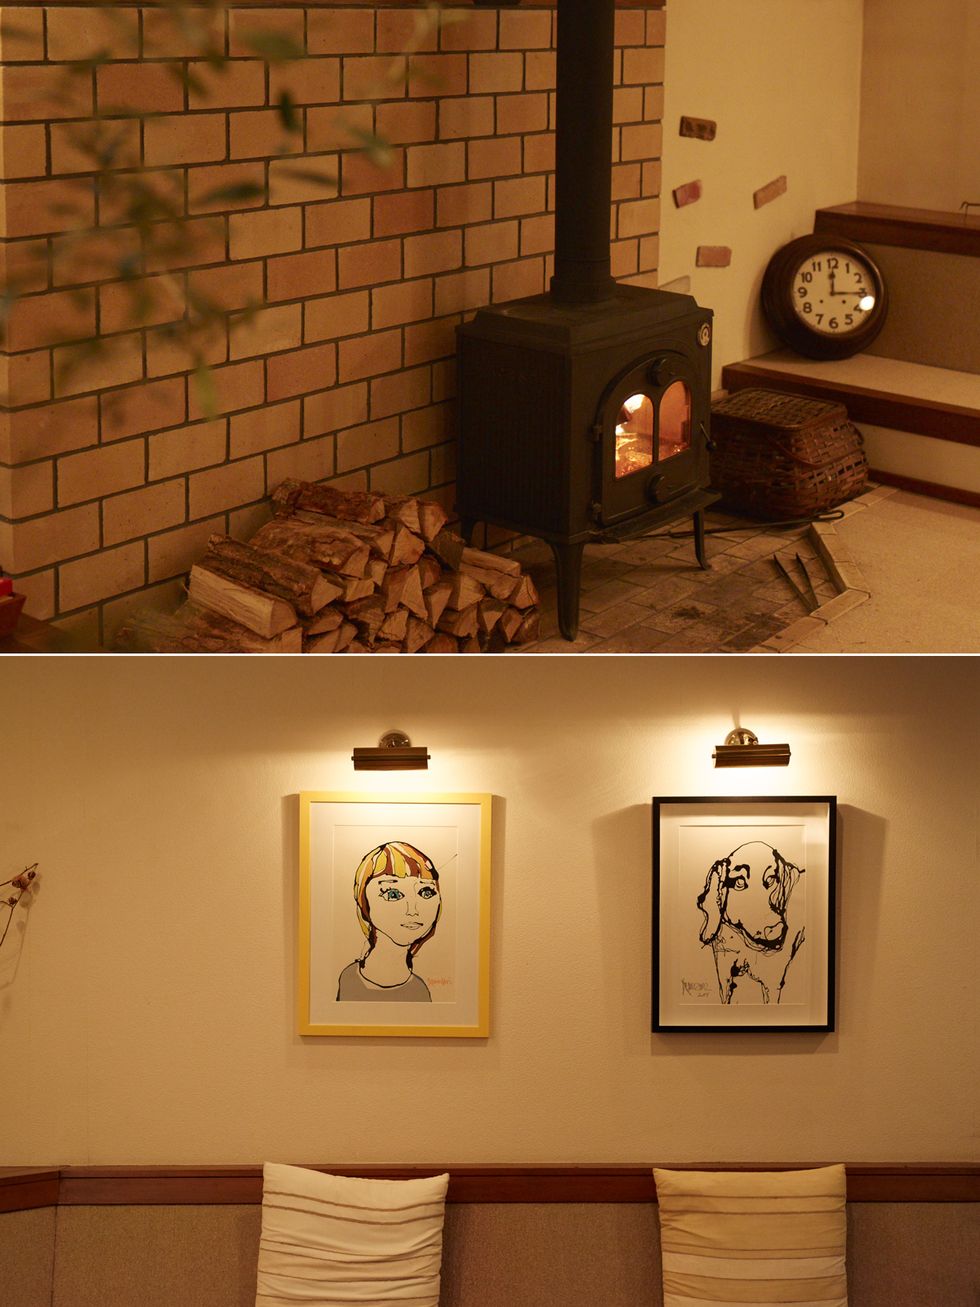 Wall, Brick, Picture frame, Gas, Heat, Wood-burning stove, Collection, Brickwork, Building material, Art exhibition, 